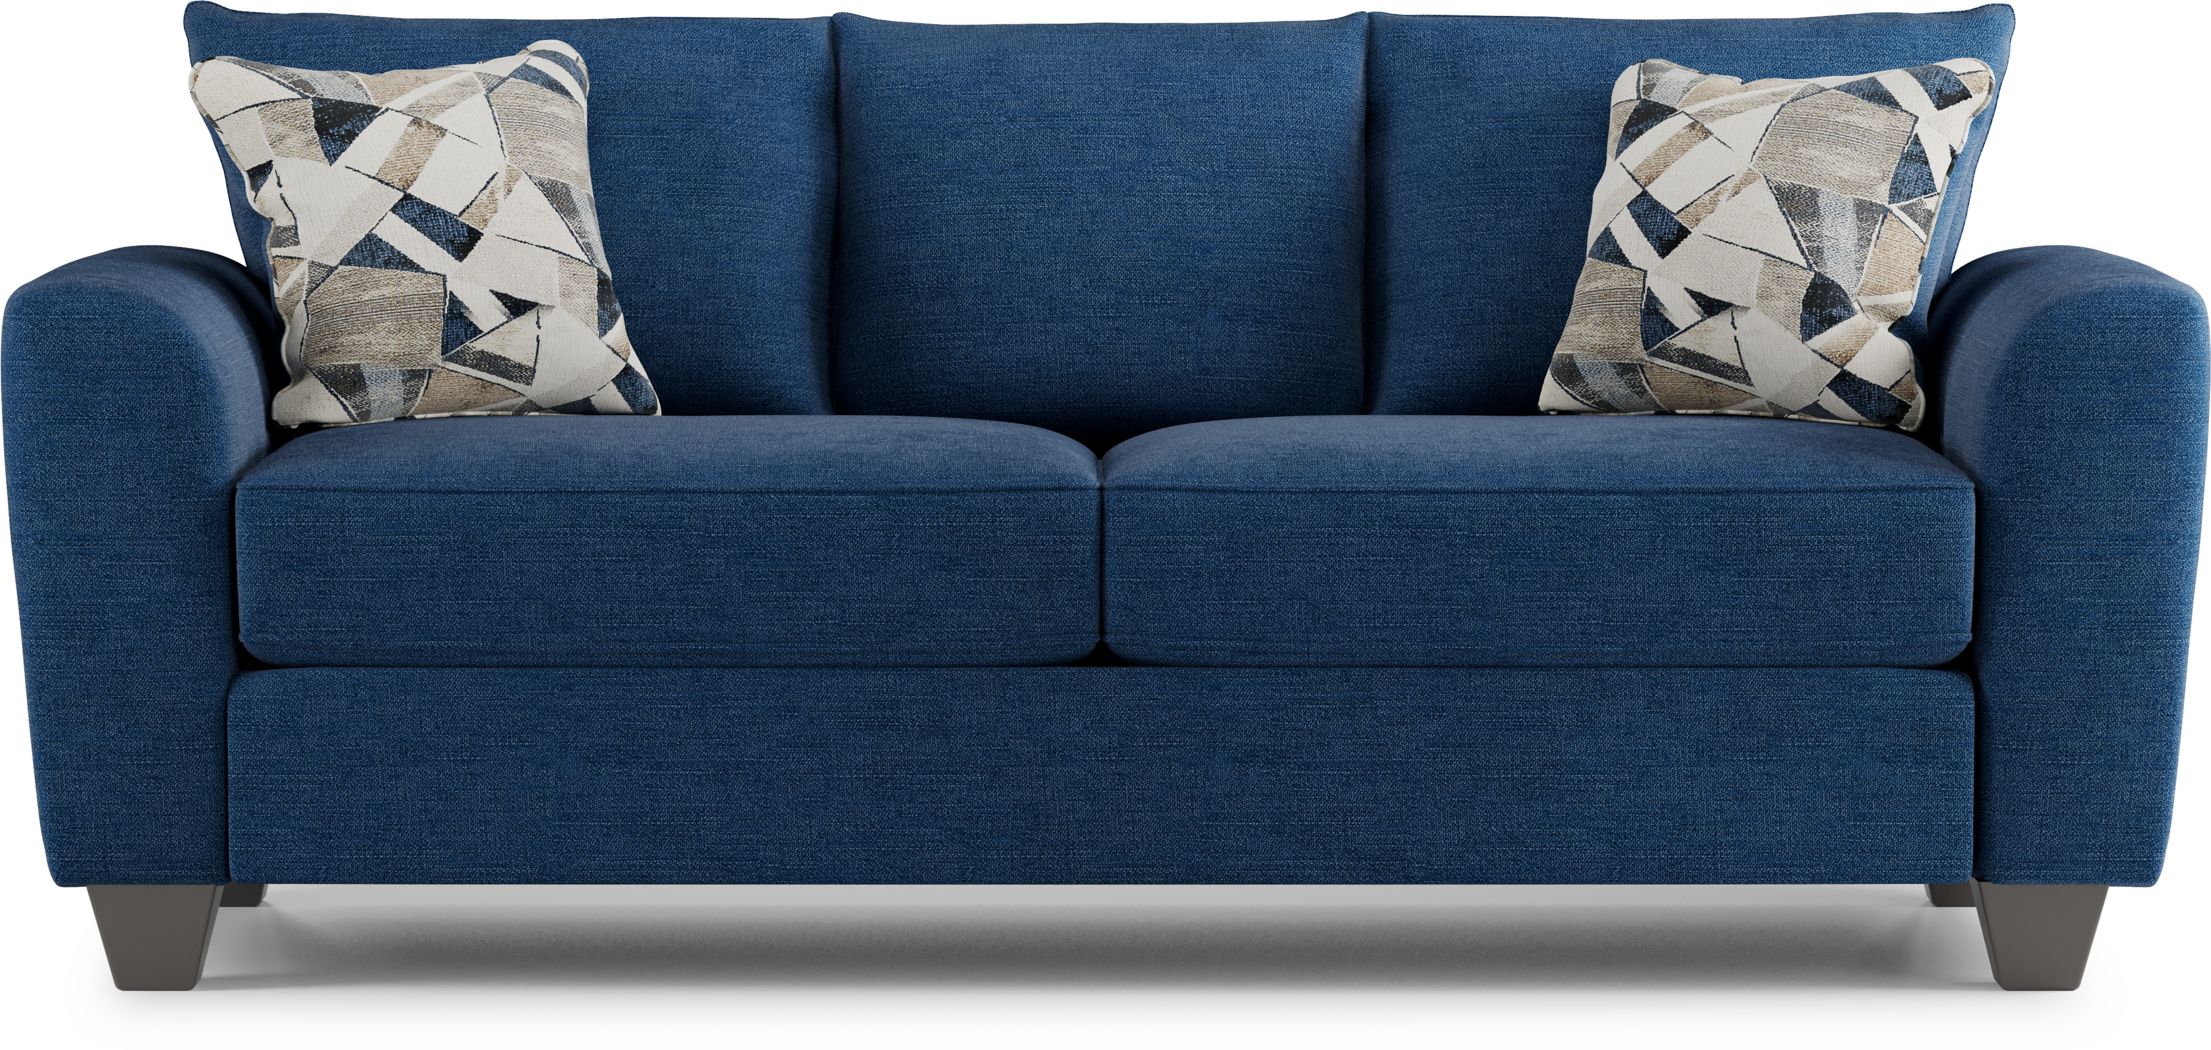 rooms to go blue sofa bed